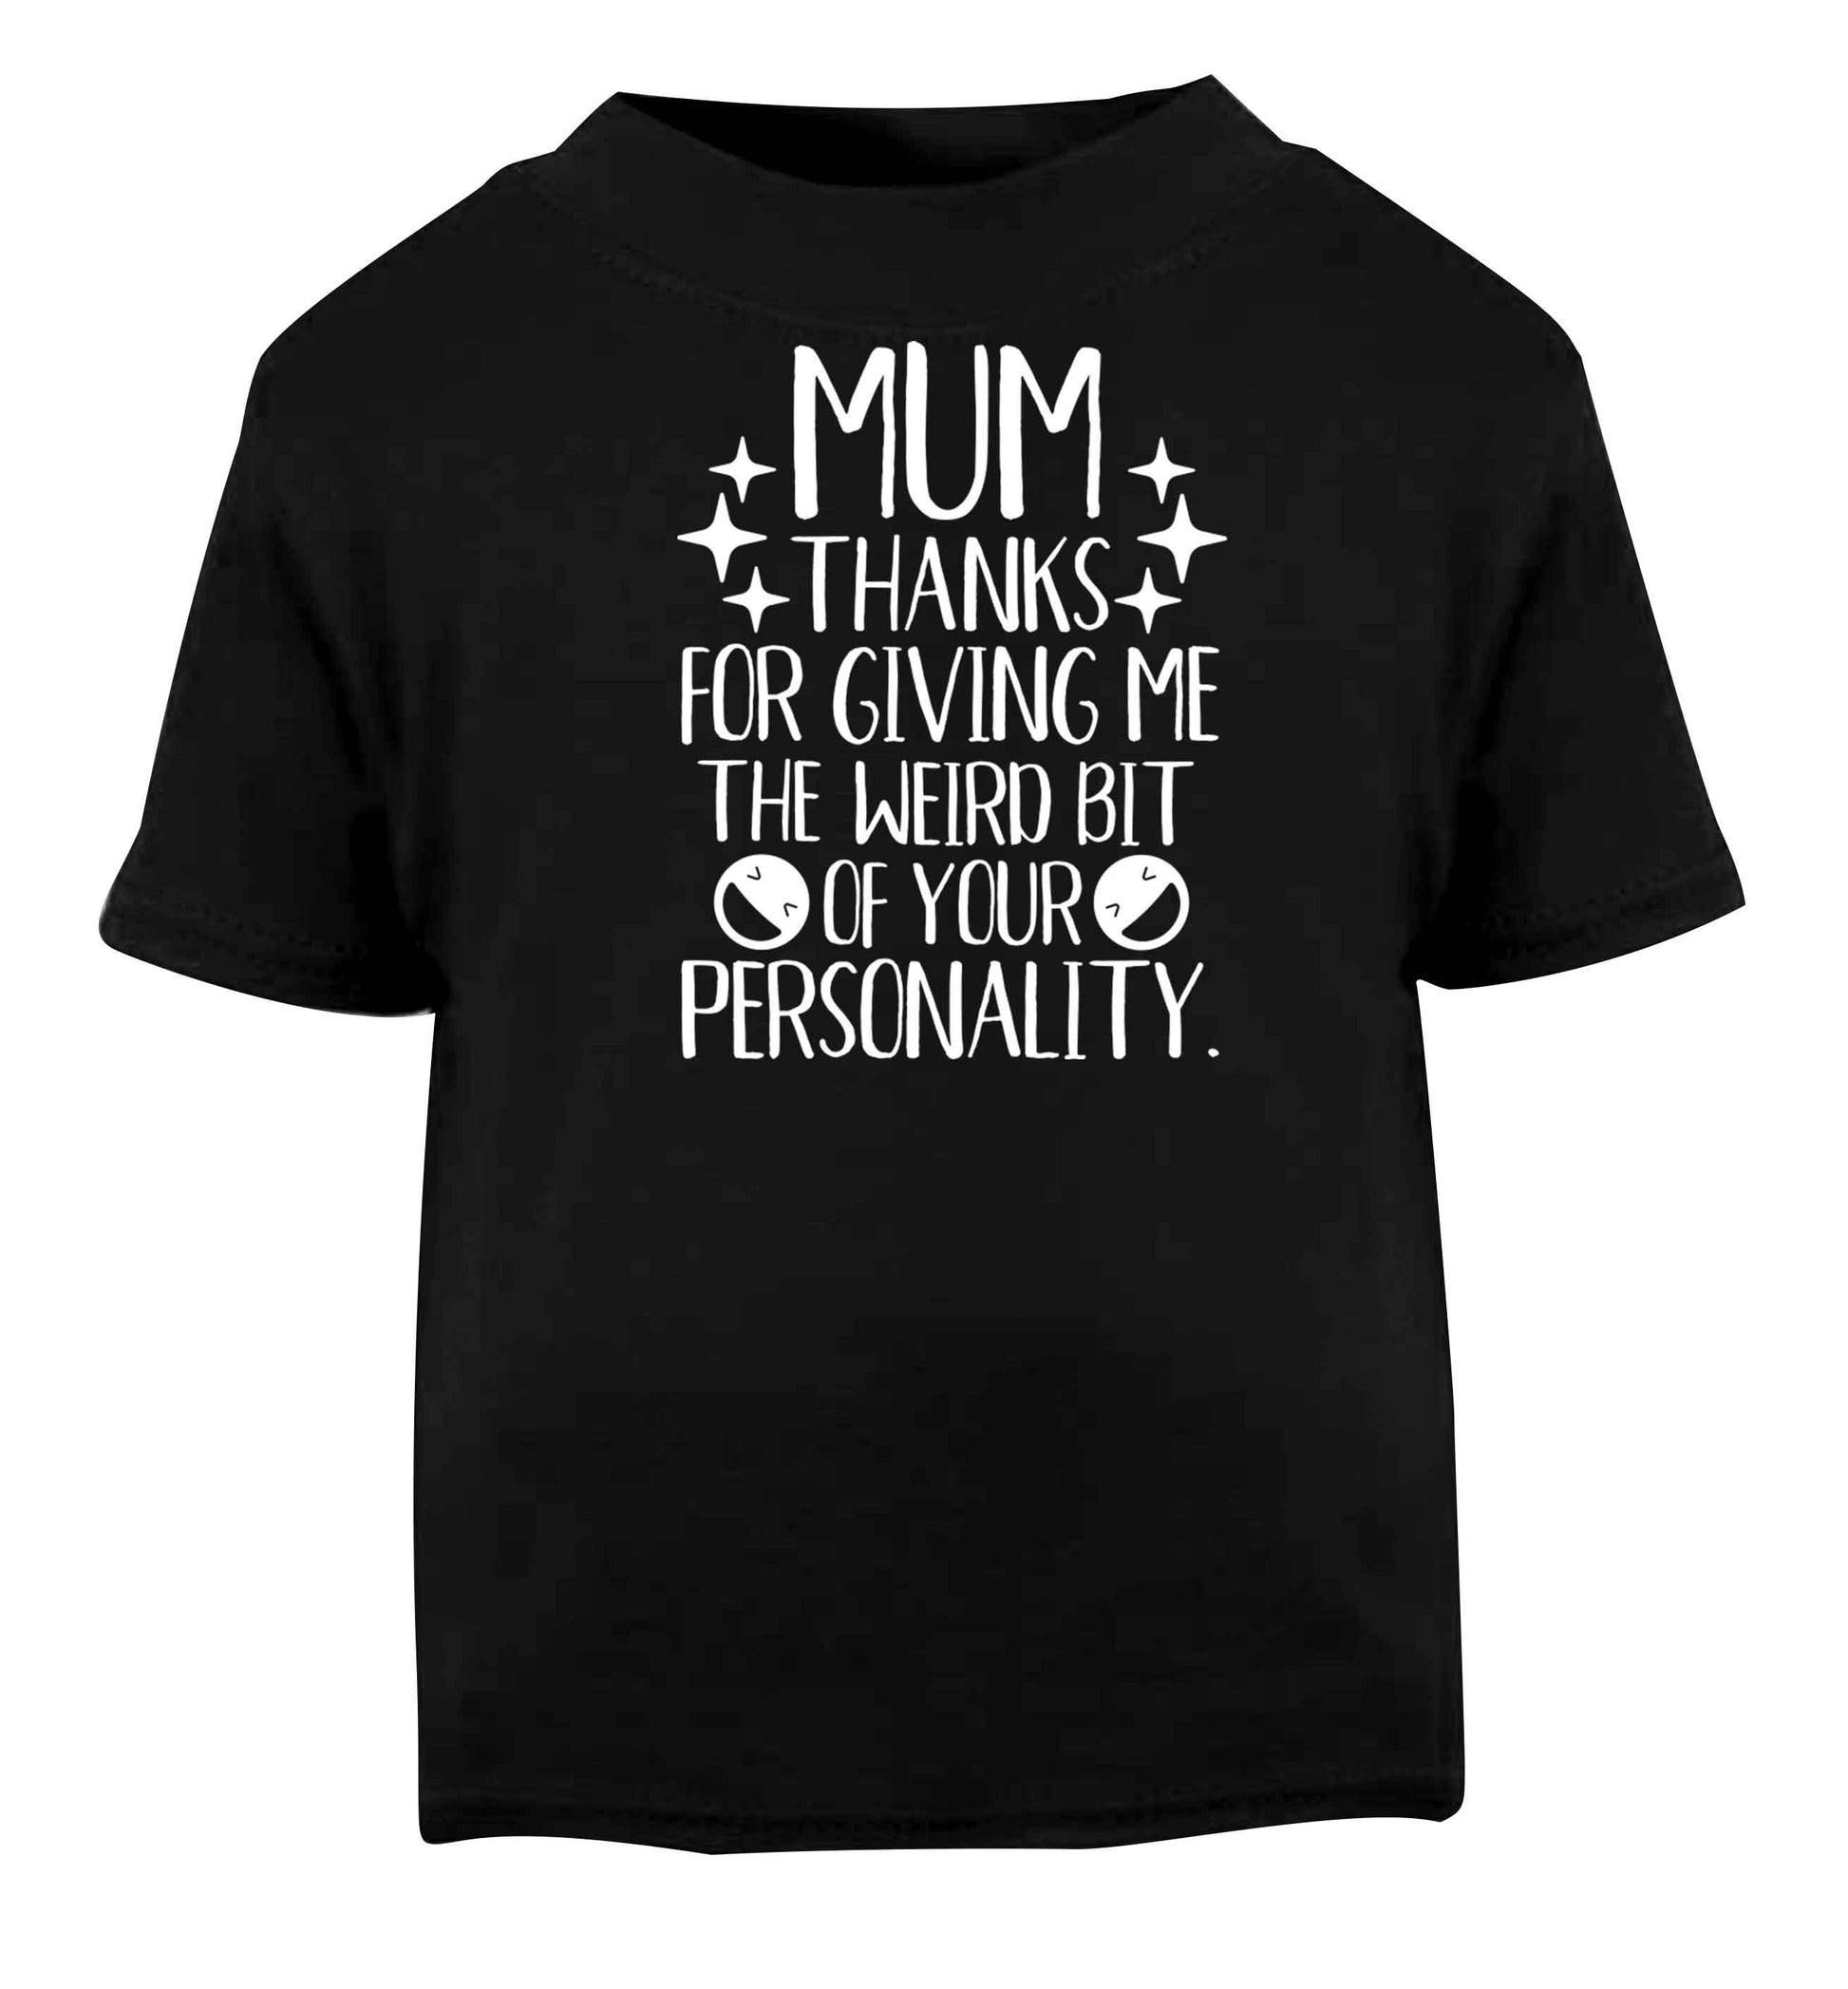 Mum, I love you more than halloumi and if you know me at all you know how deep that is Black baby toddler Tshirt 2 years